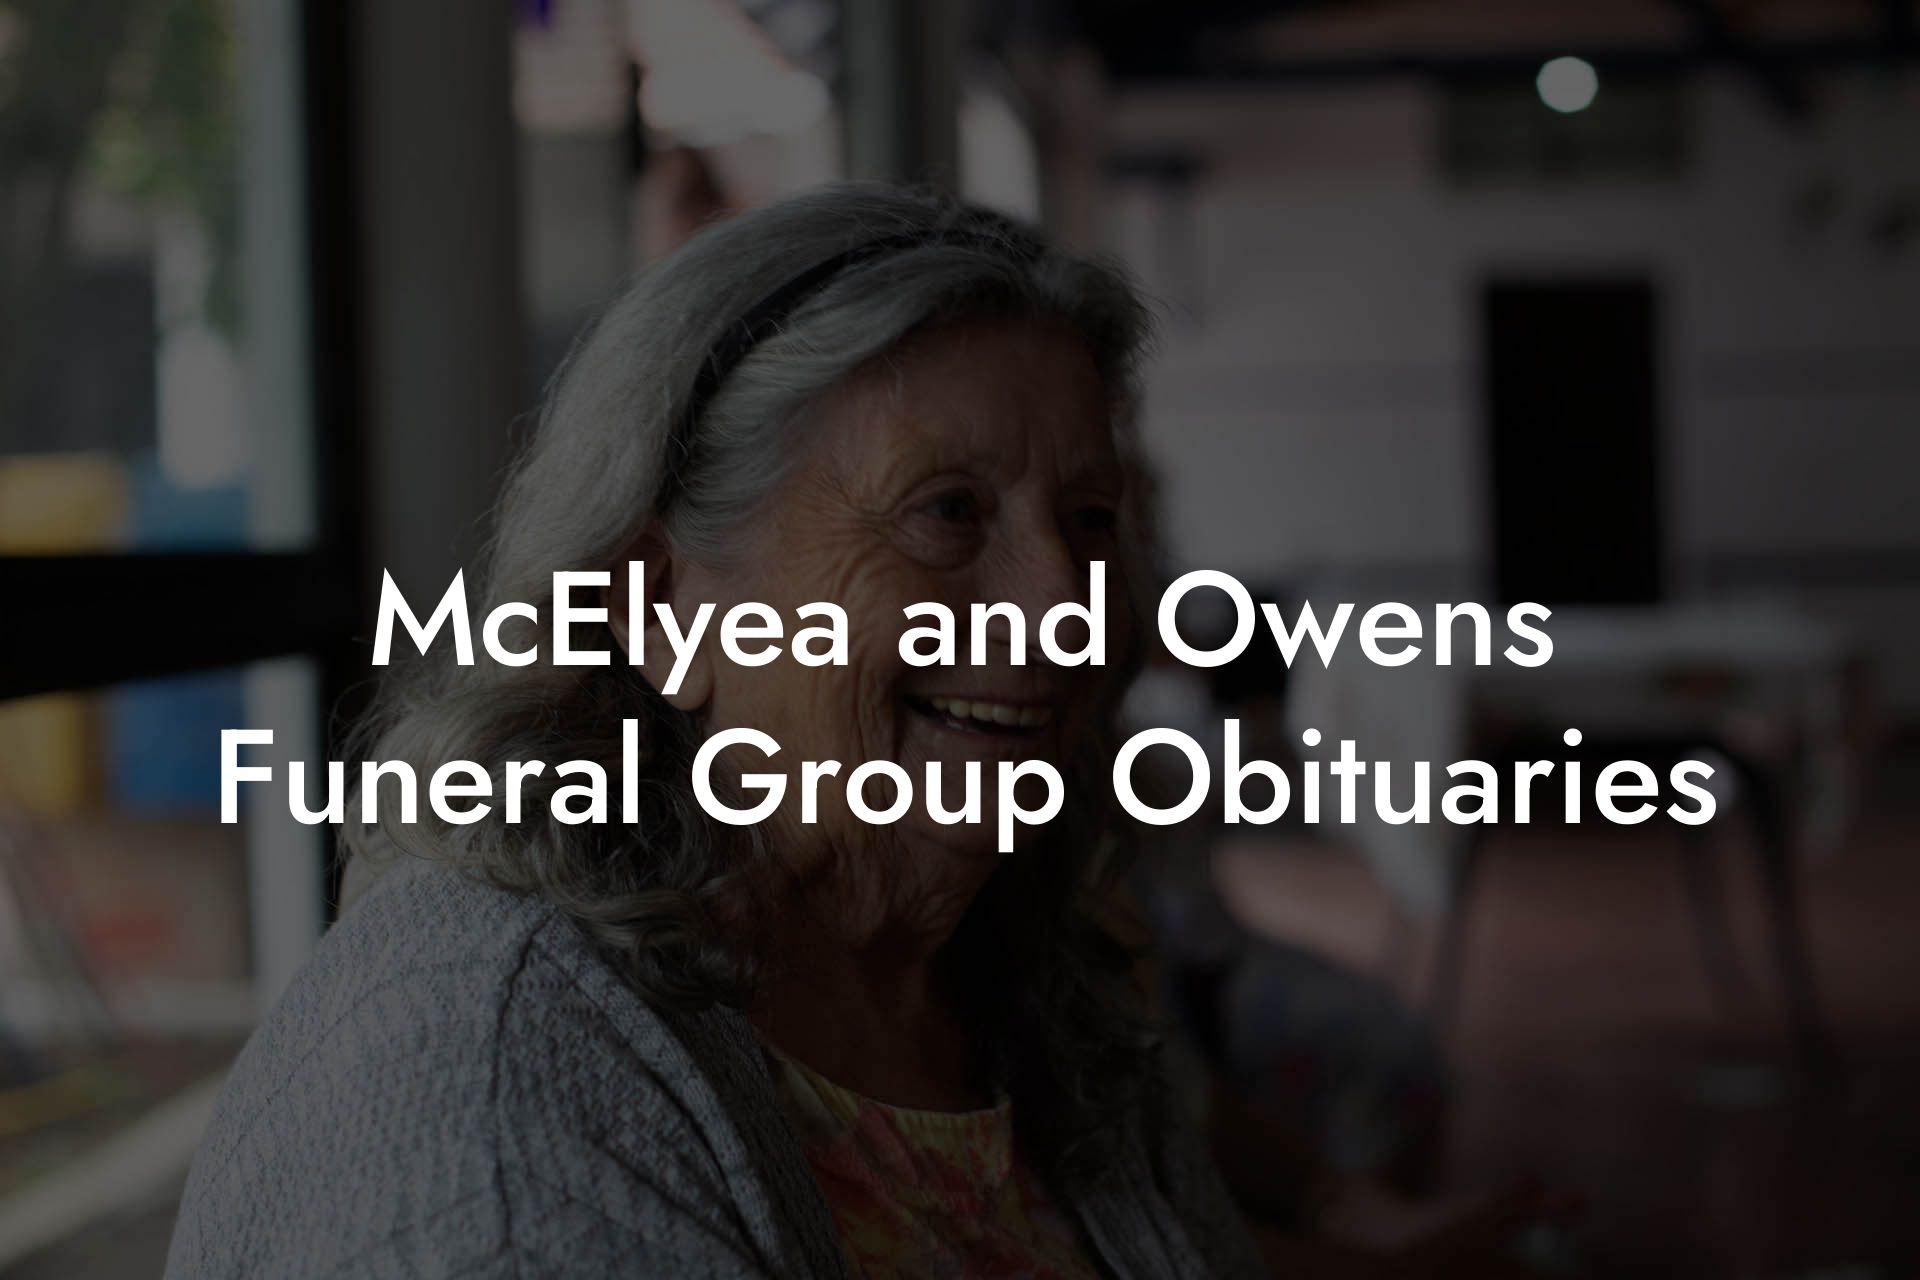 McElyea and Owens Funeral Group Obituaries